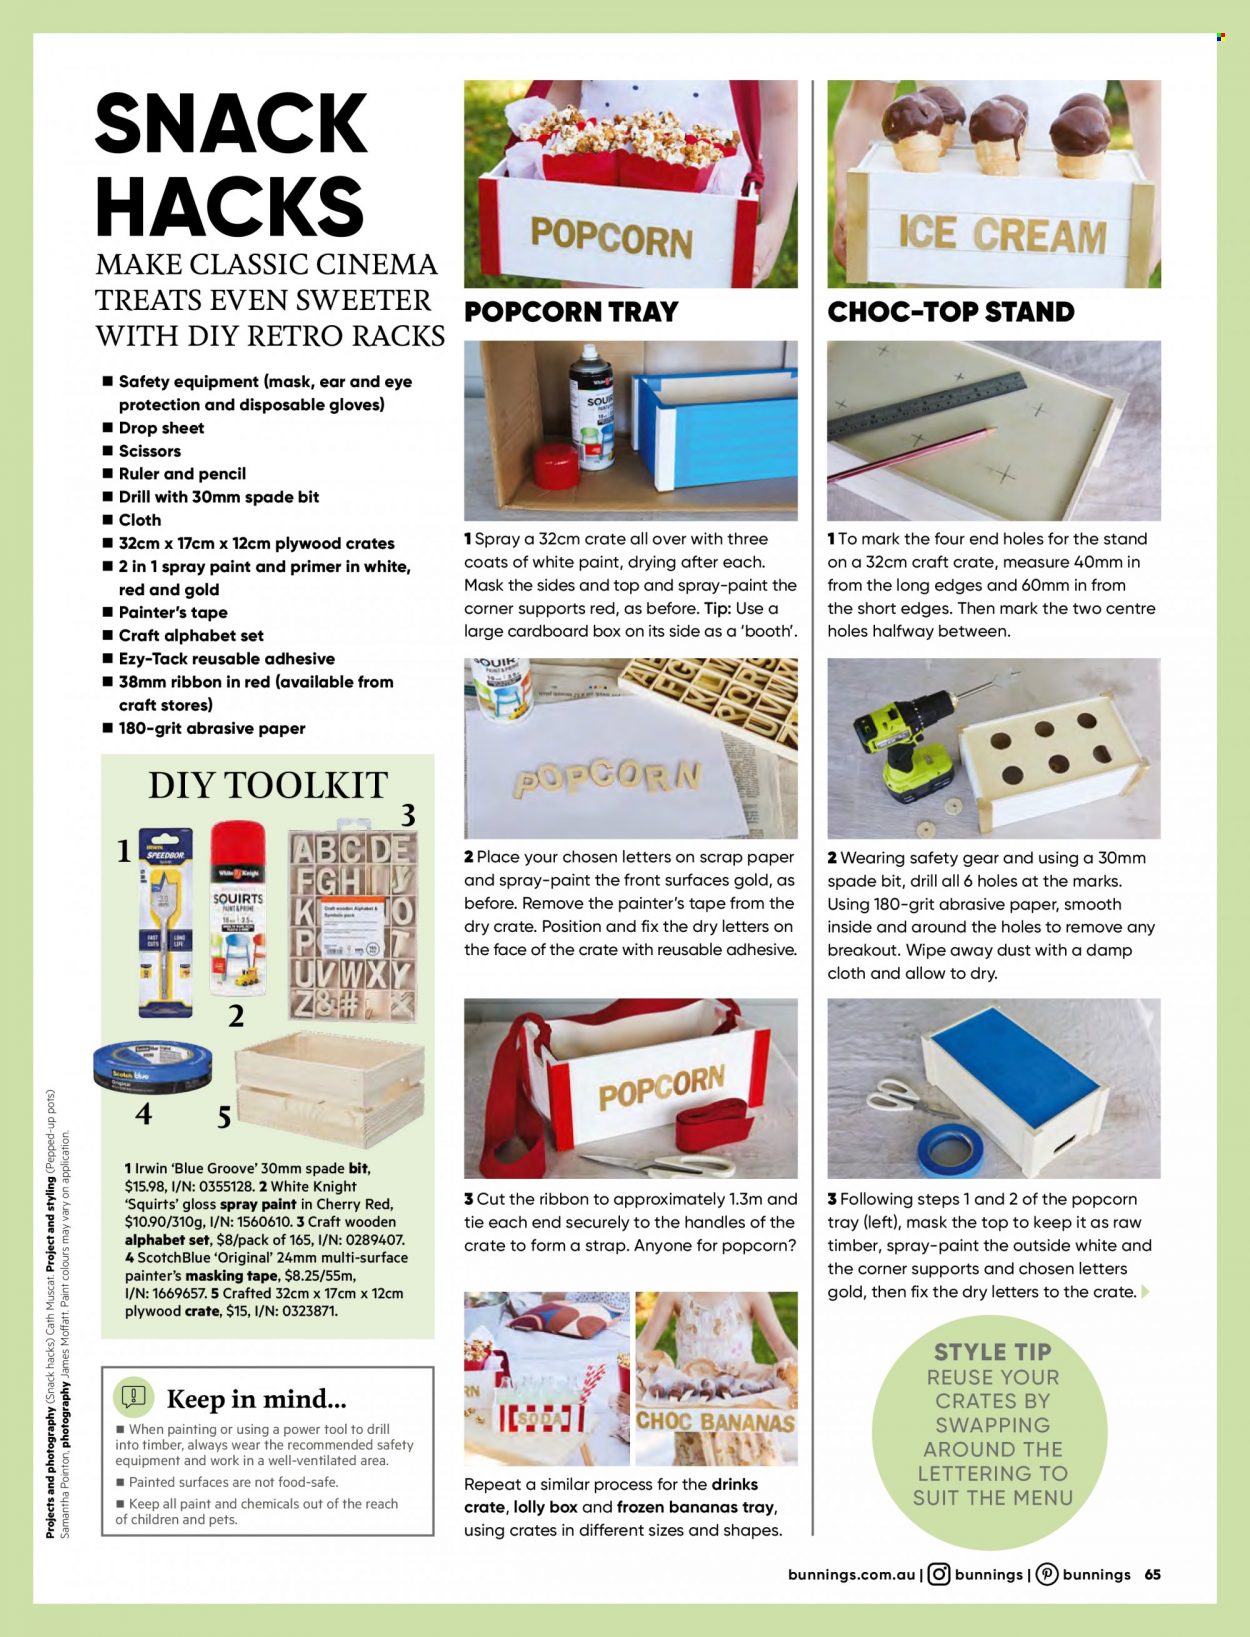 thumbnail - Bunnings Warehouse mailer - 01.01.2023 - 31.01.2023 - Sales products - gloves, disposable gloves, tray, pot, masking tape, plastic drop sheet, spray paint, scissors, crate. Page 65.